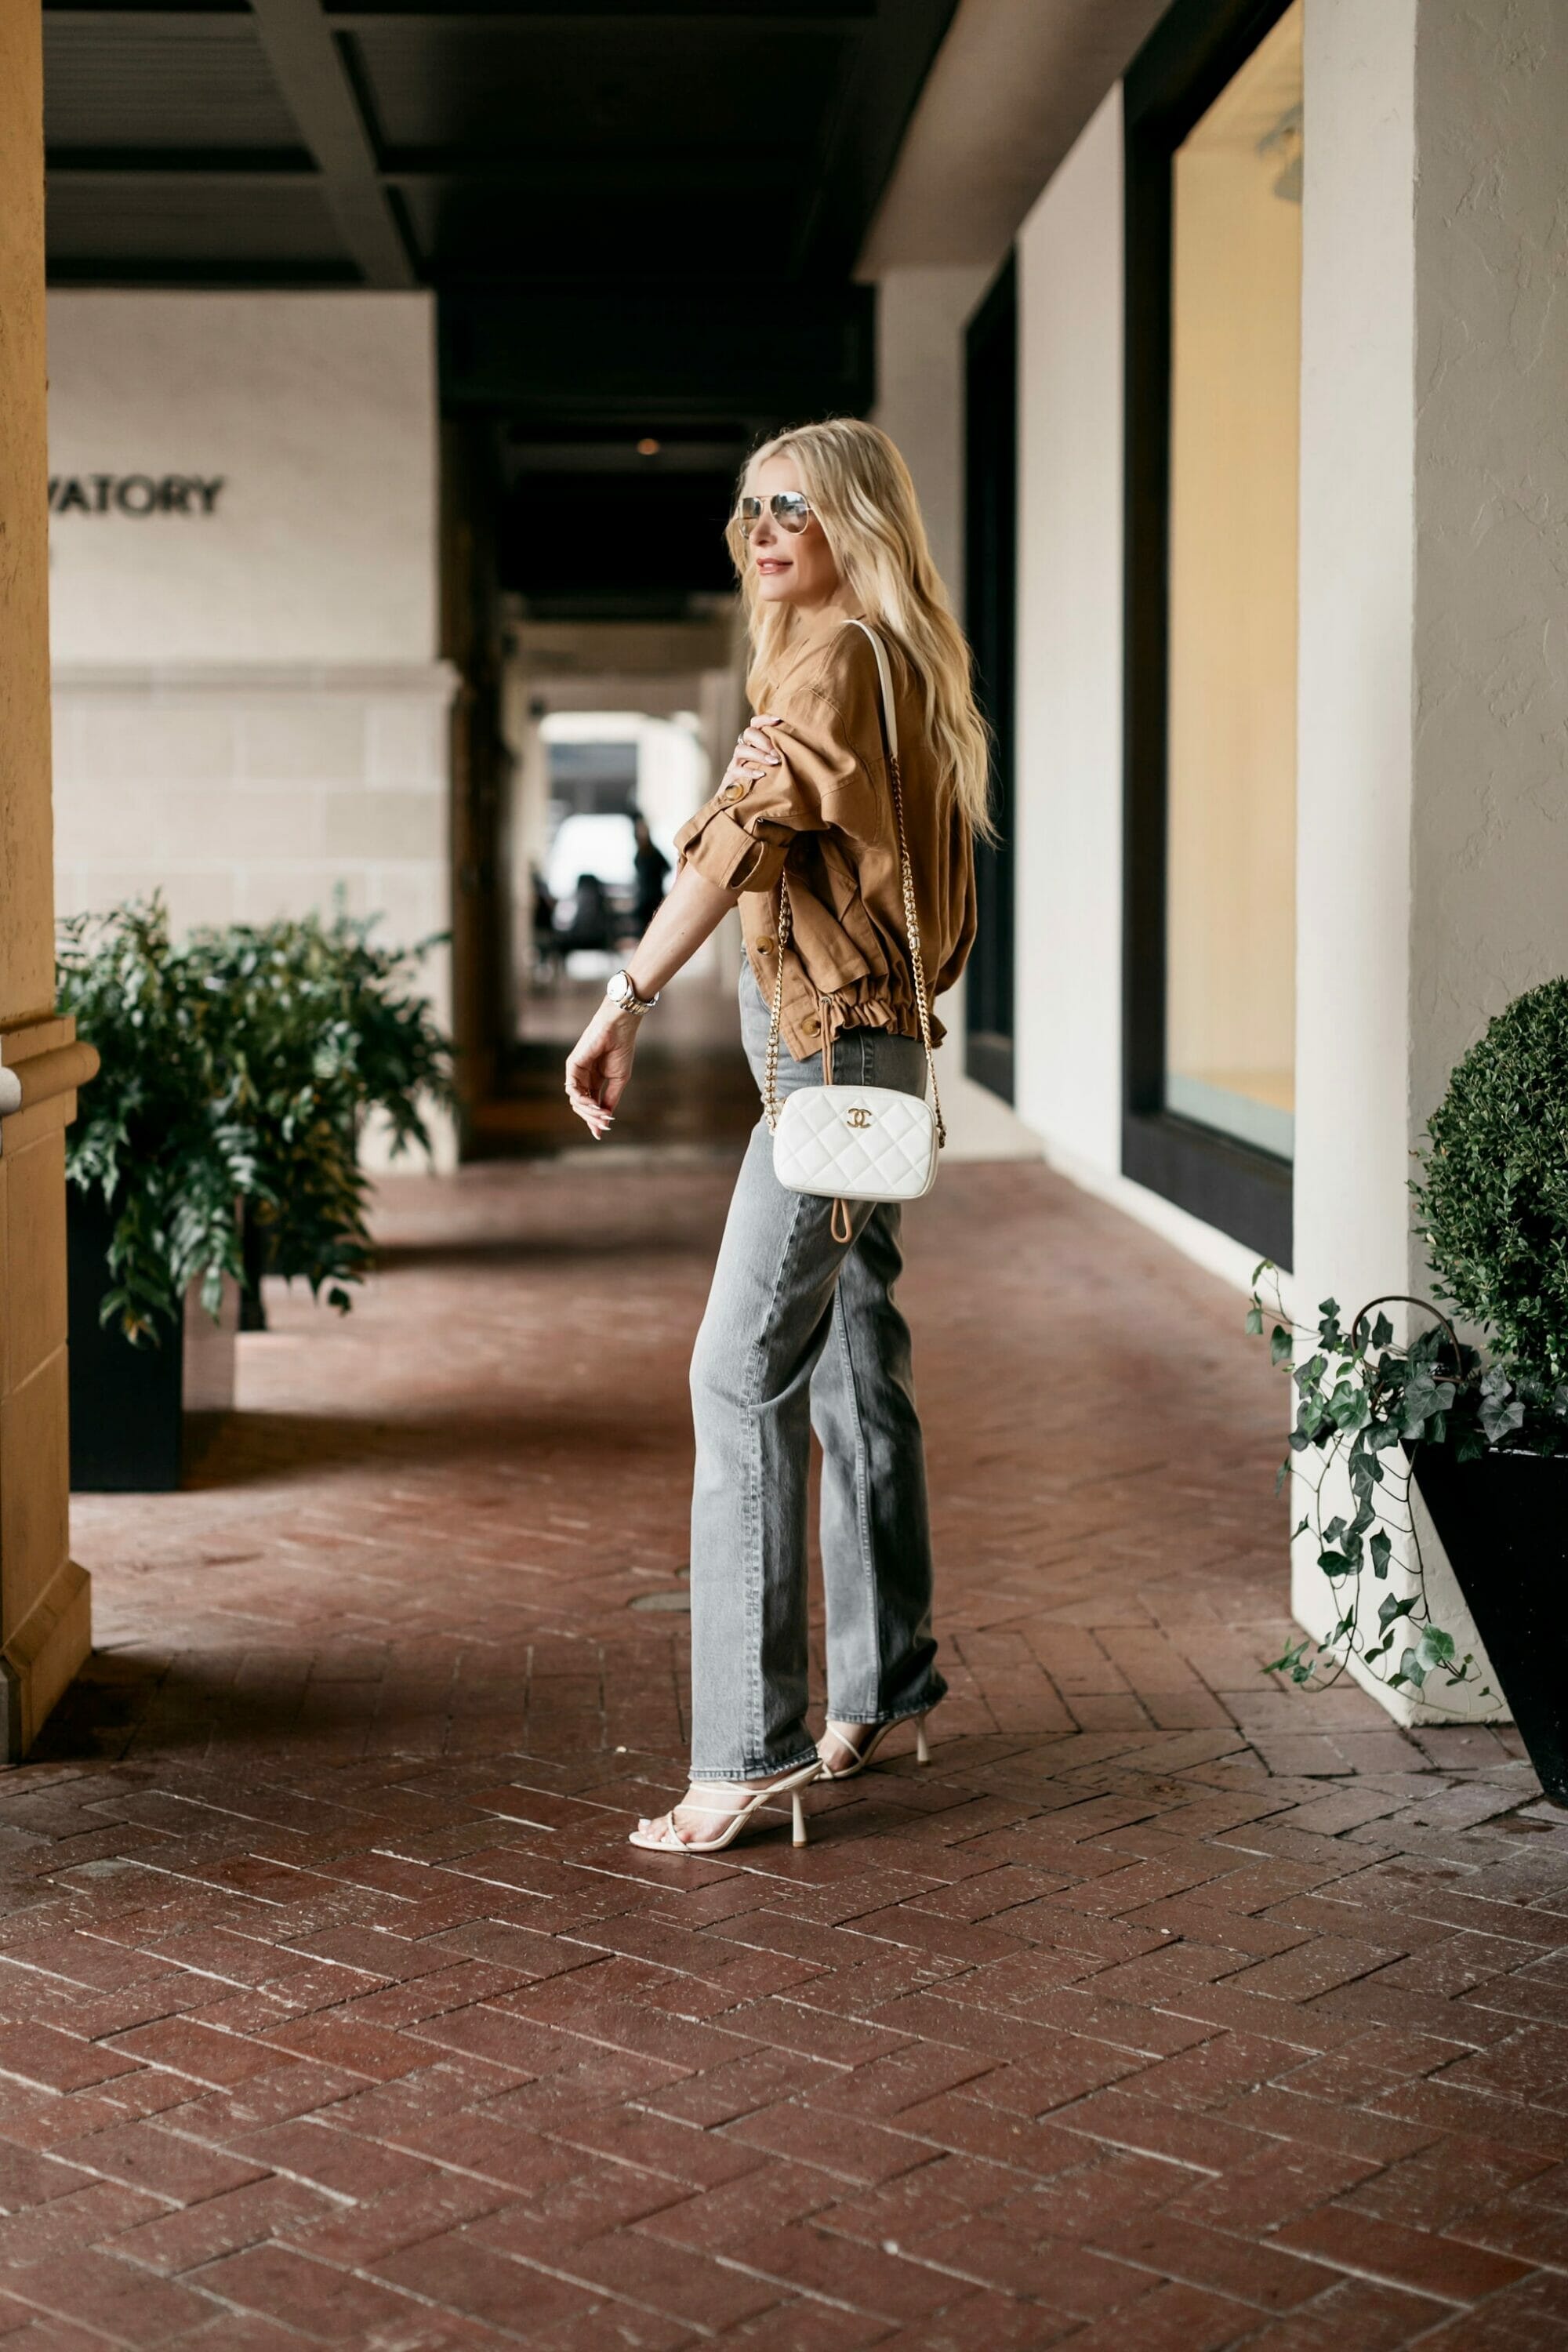 Over 40 Dallas fashion blogger wearing gray and camel as one of 5 expensive looking color combinations.